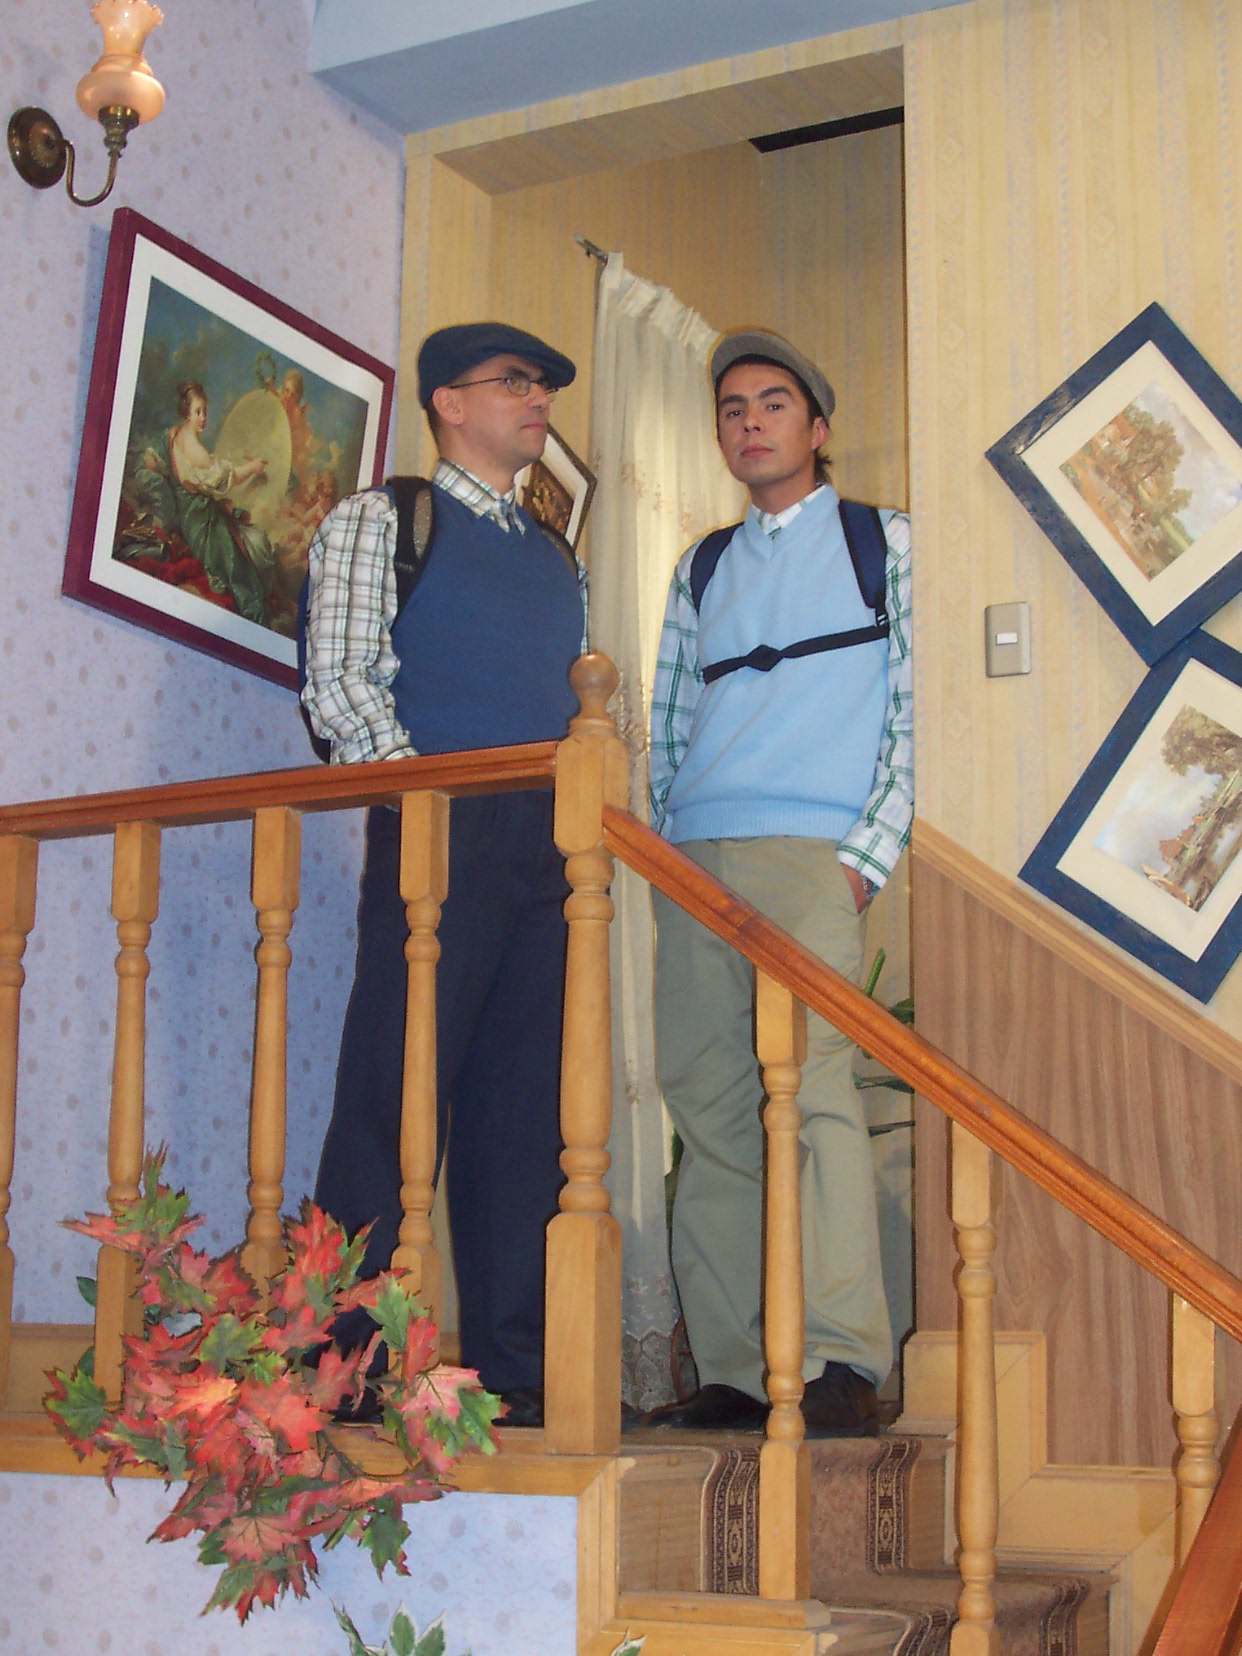 two men are standing on a stairs in a home